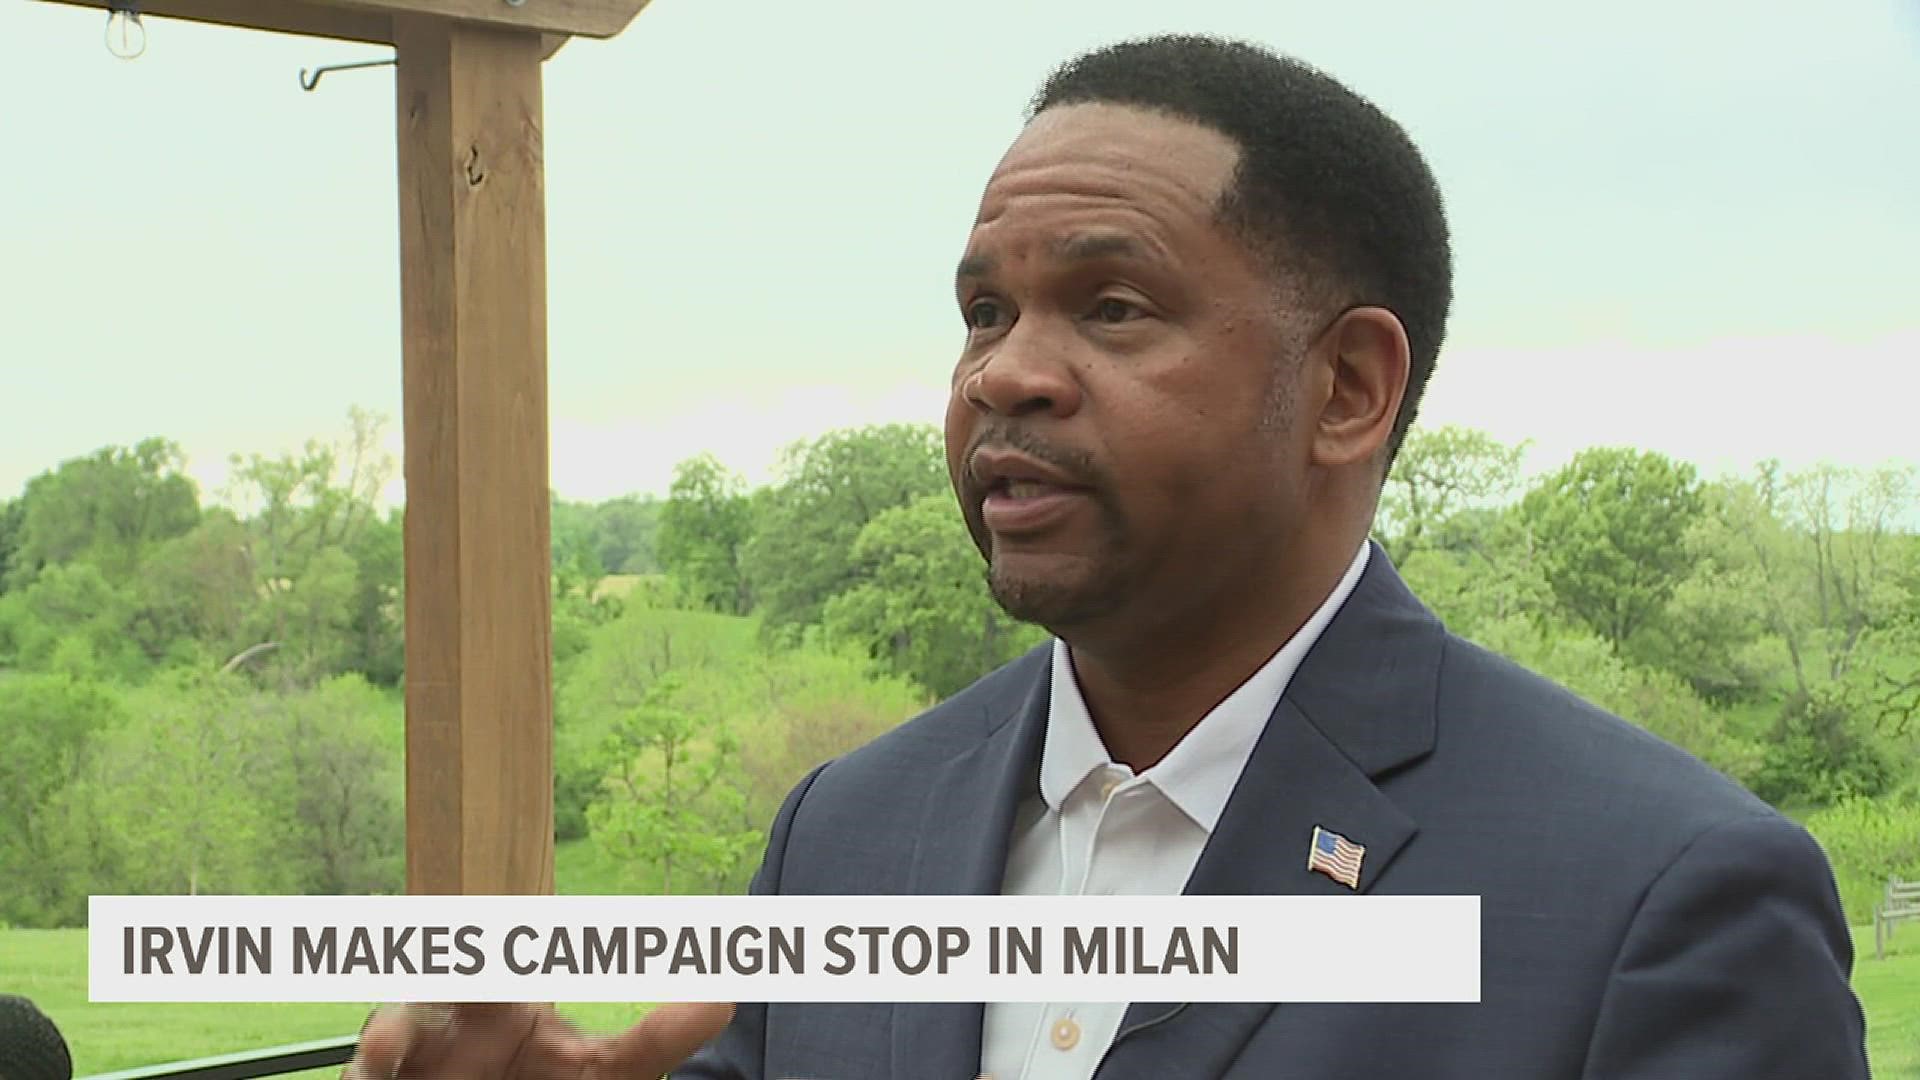 Richard Irvin is running against six others for the Republican nomination.